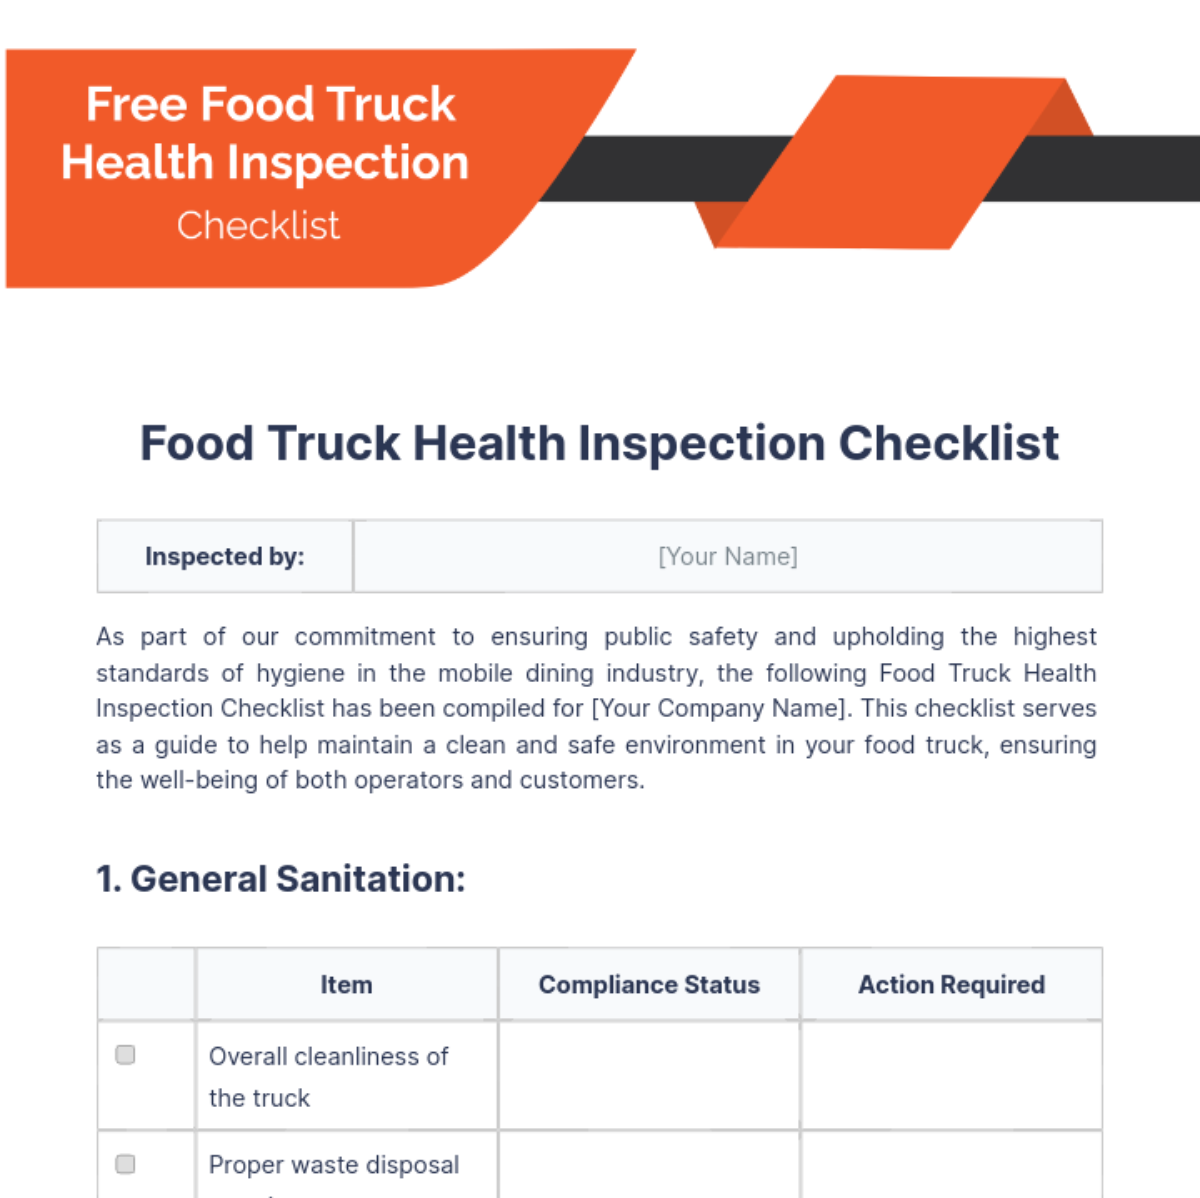 Free Food Truck Health Inspection Checklist Template